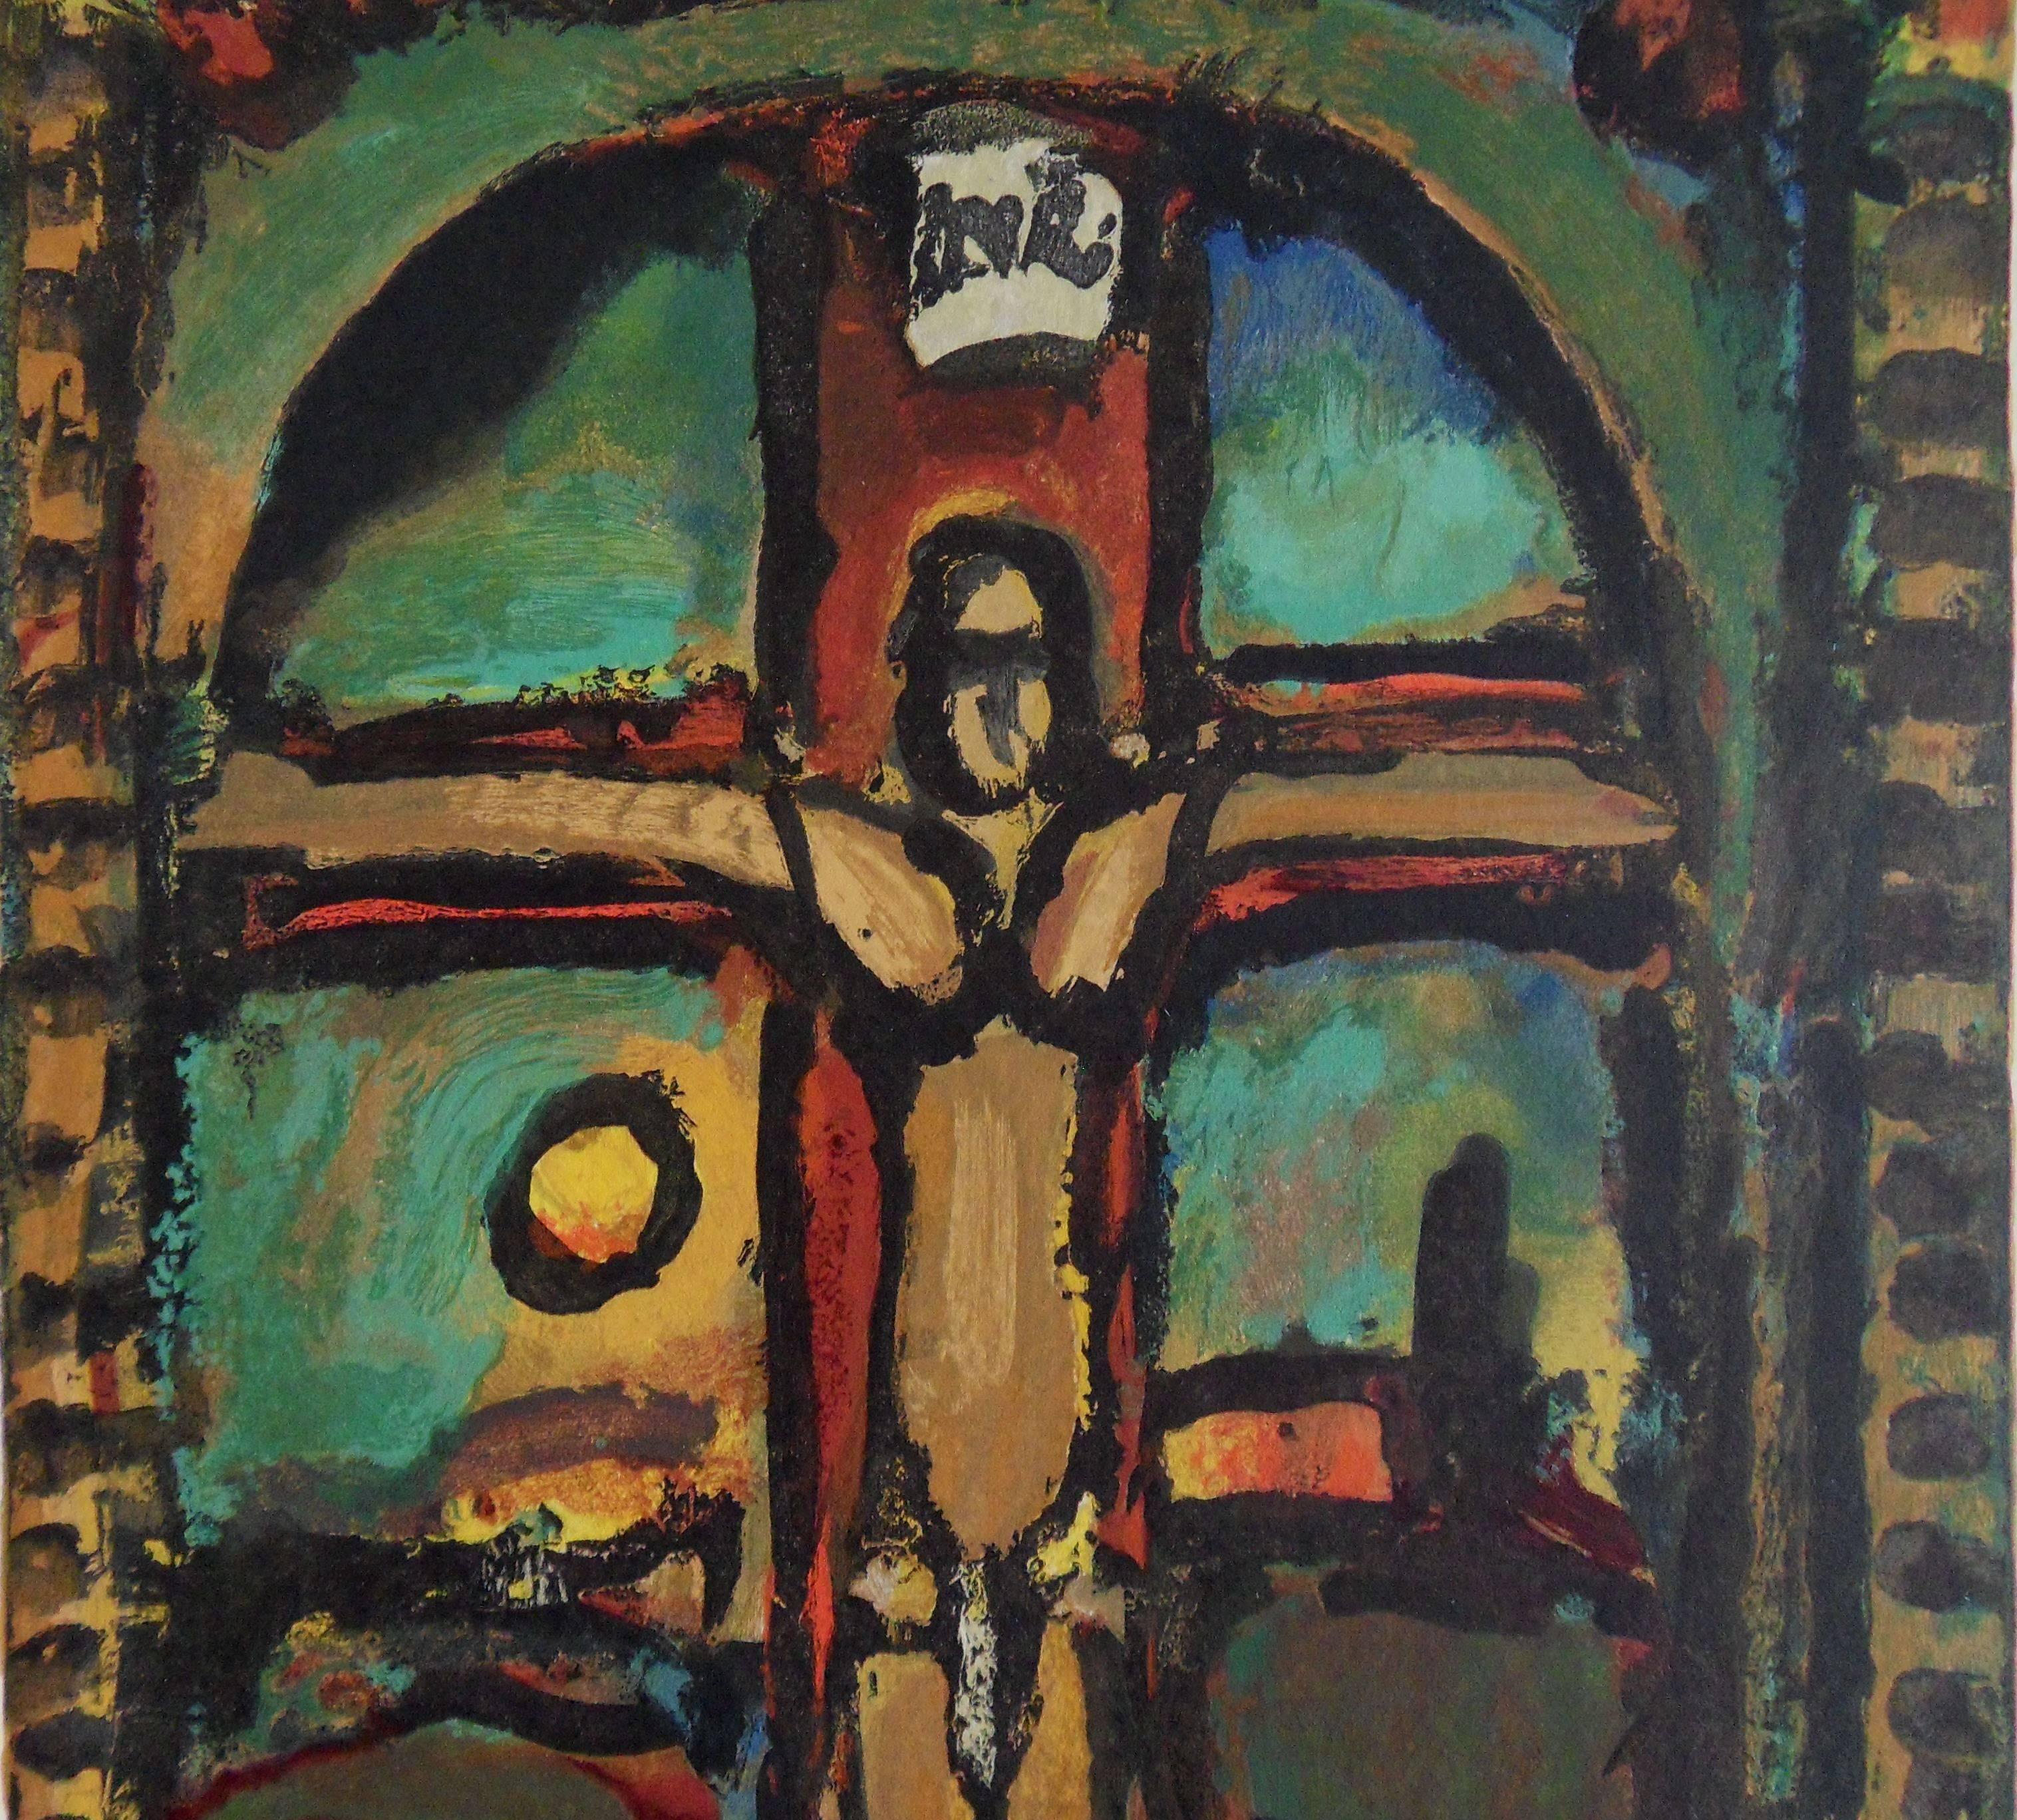 Crucifixion - woodcut - Black Figurative Print by Georges Rouault